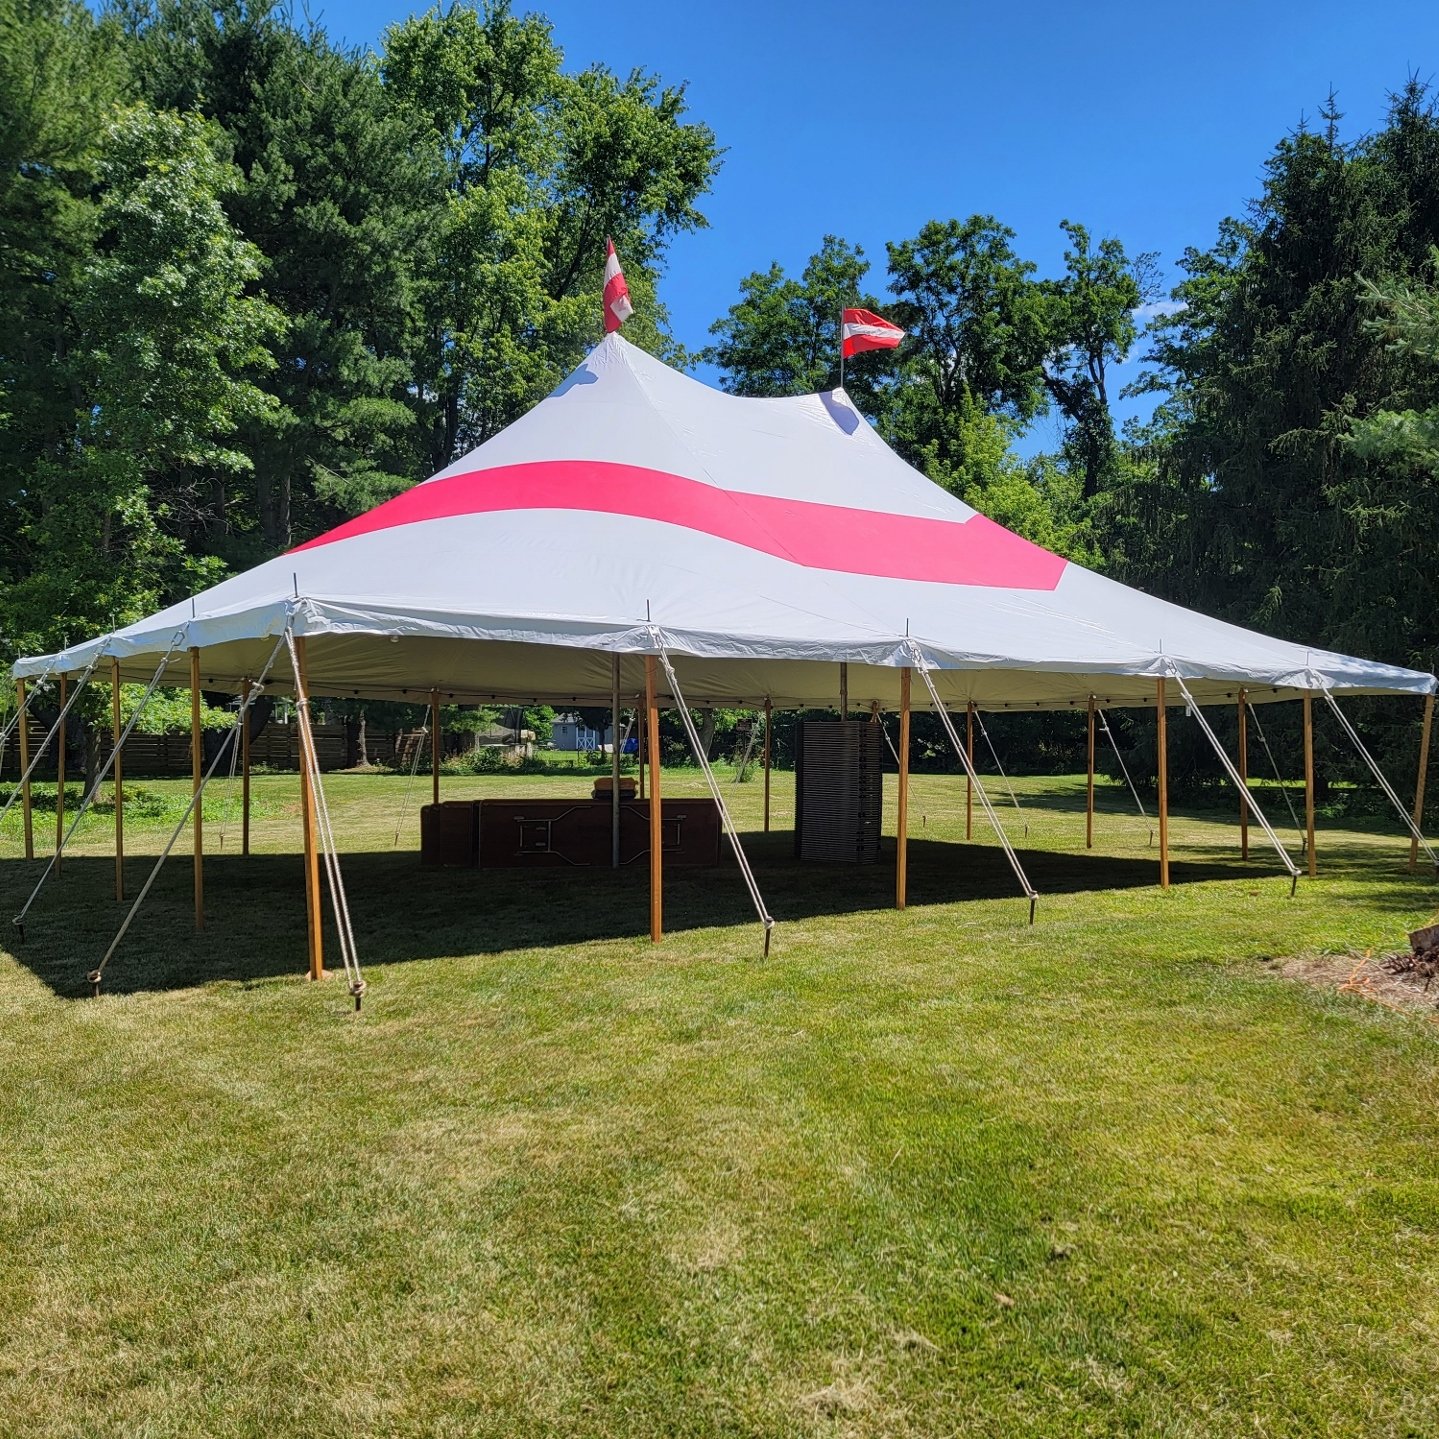 30x40 red and white striped colored tent